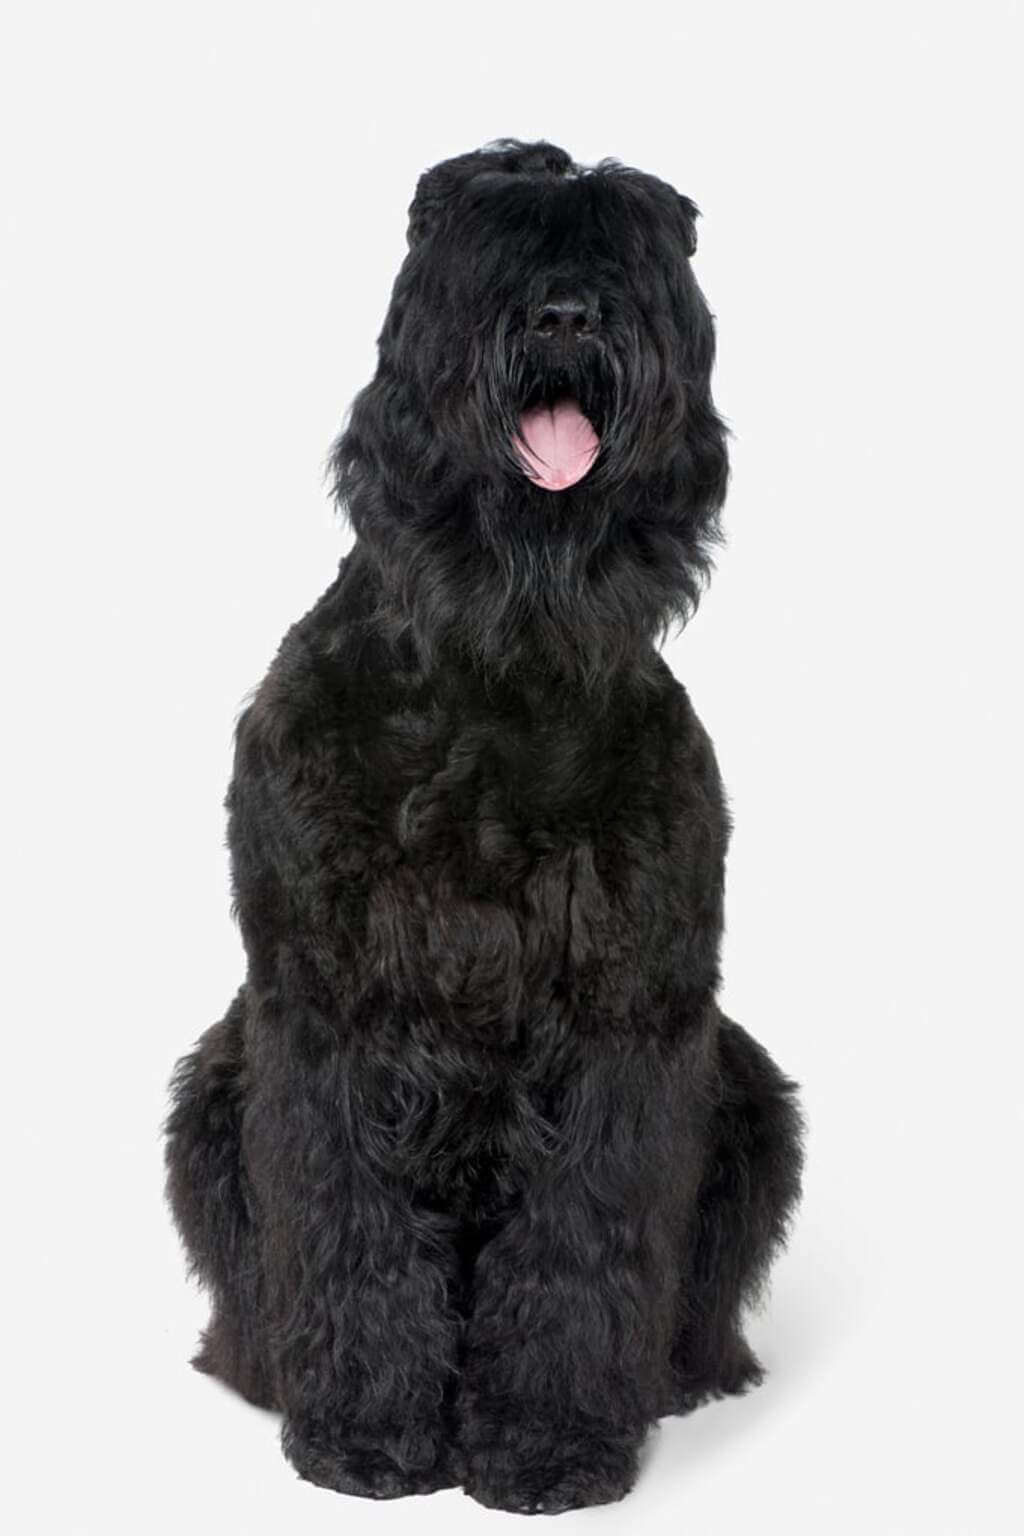 Personality of Black Russian Terrier